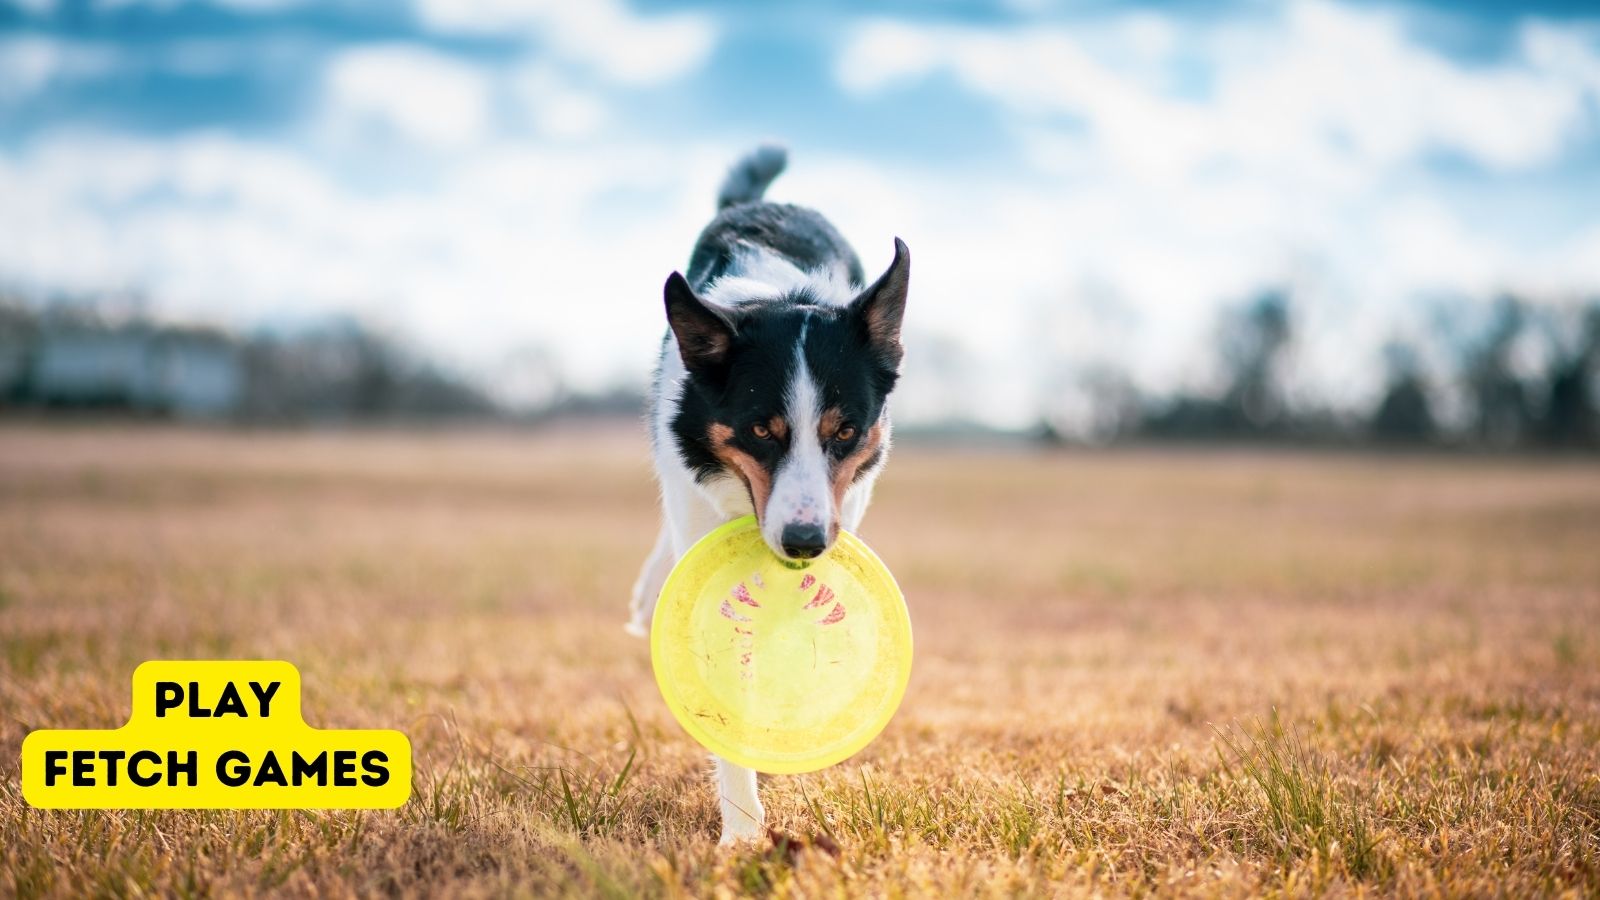 10 Dog Games Your Dog Will Love to Play